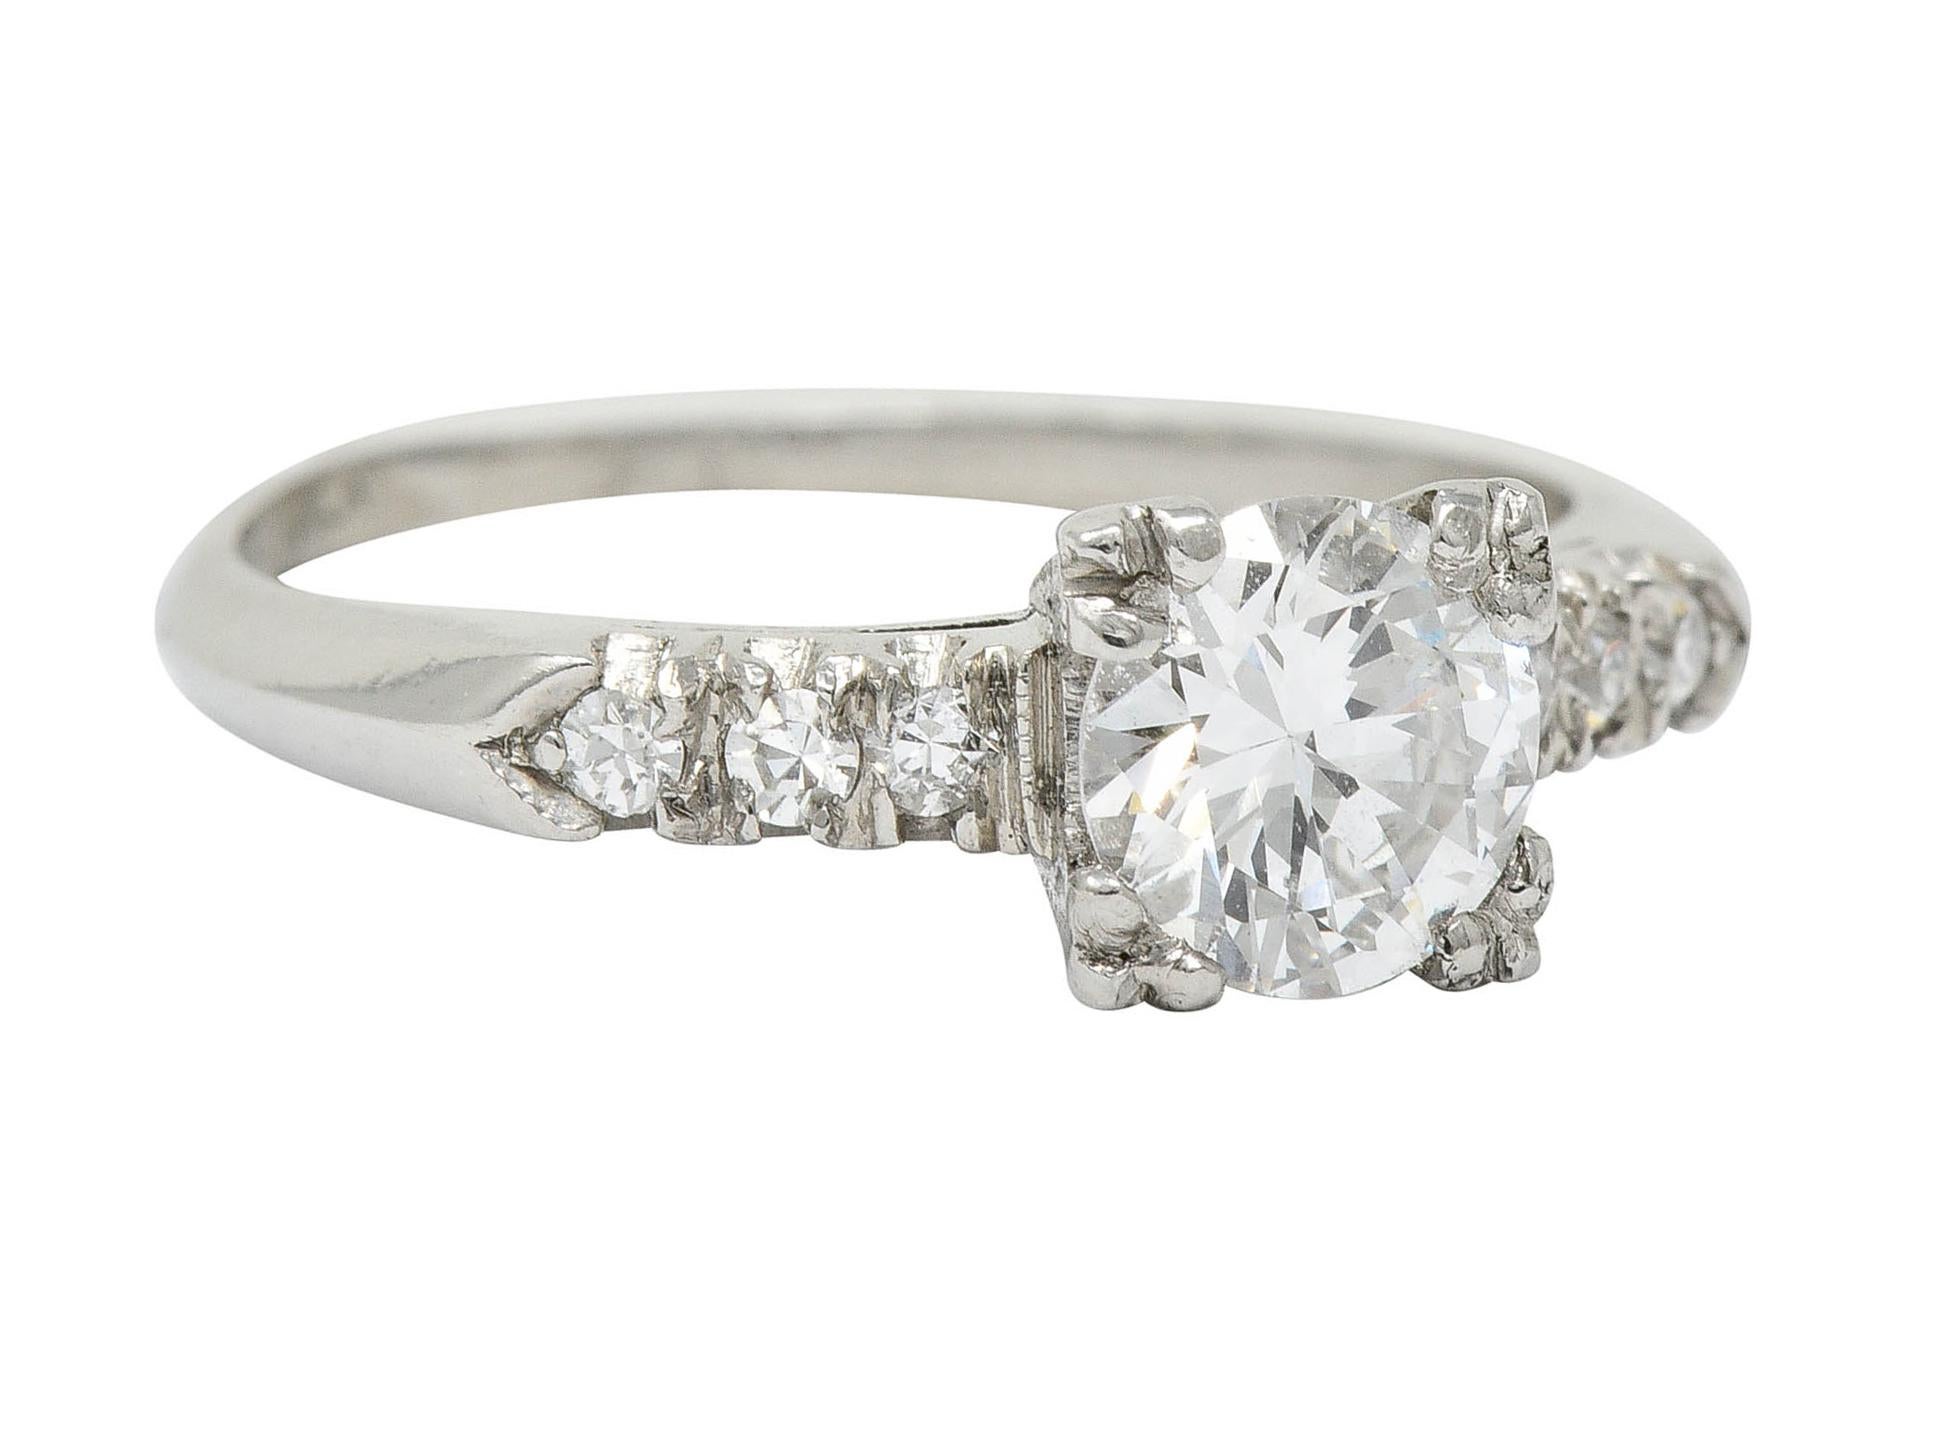 Engagement ring is designed with a stylized square form head, fishtail set shoulders, and a knife edge shank

Centering a transitional cut diamond weighing approximately 0.60 carat; J color with SI clarity

Flanked by single cut diamonds weighing in